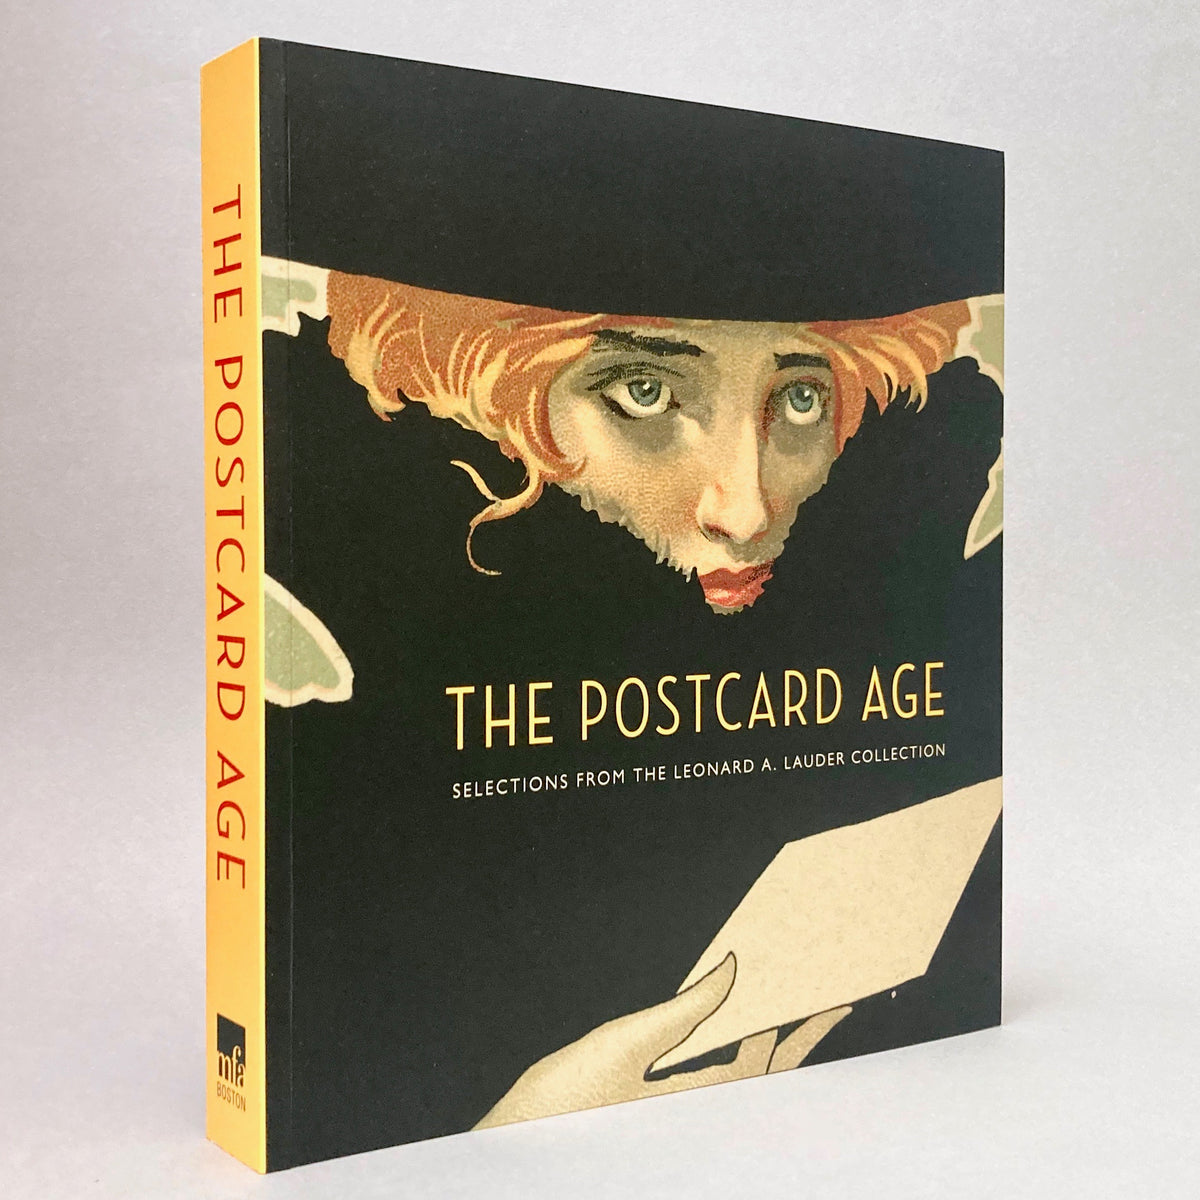 The Postcard Age: Selections from the Leonard A. Lauder Collection